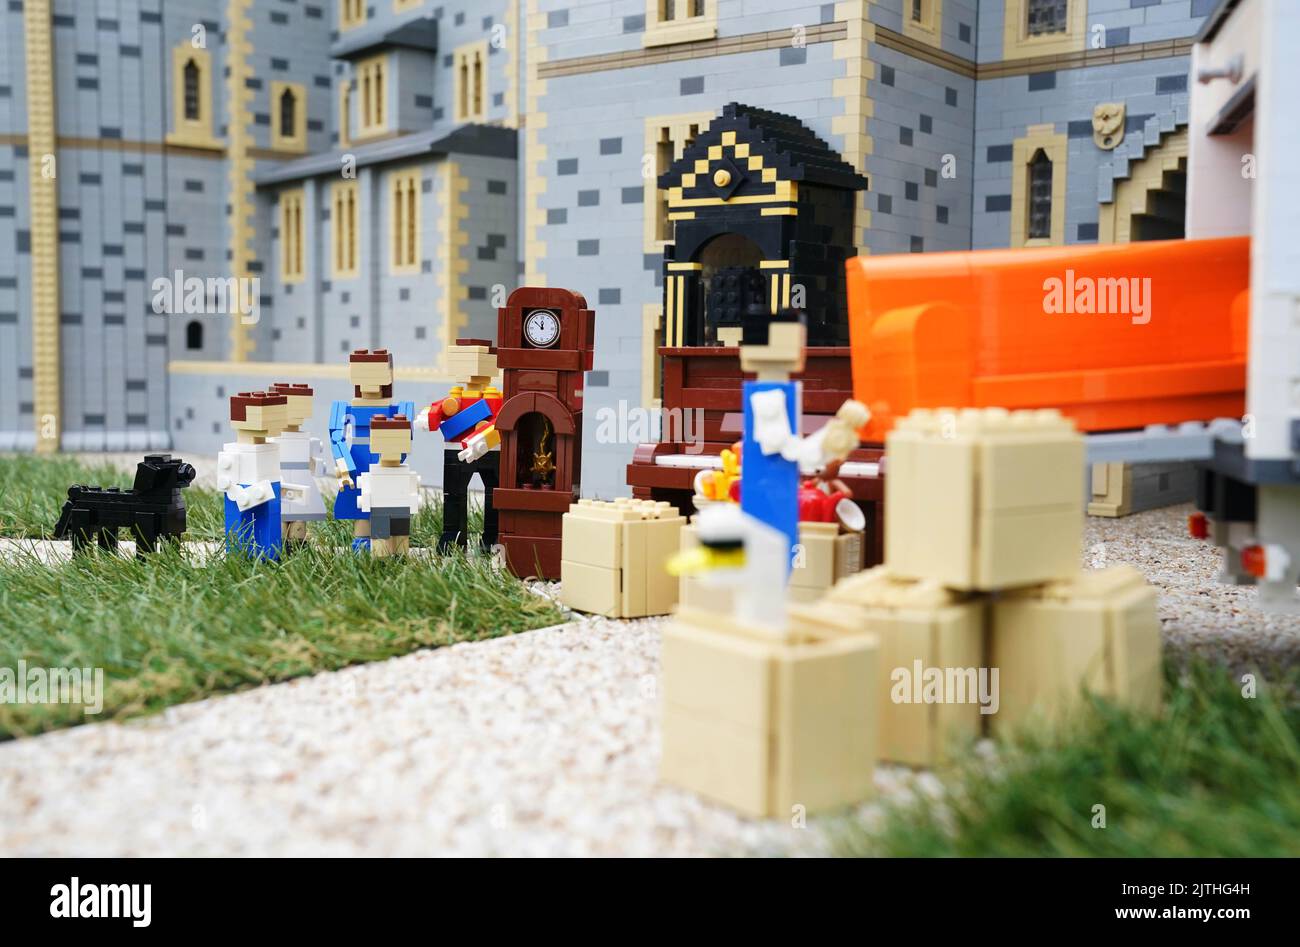 https://c8.alamy.com/comp/2JTHG4H/mini-lego-figures-of-the-duke-and-duchess-of-cambridge-and-their-family-are-unveiled-at-legoland-windsor-to-celebrate-the-royal-couple-moving-to-the-local-area-with-their-family-becoming-neighbours-of-the-theme-park-and-resort-in-berkshire-picture-date-tuesday-august-30-2022-2JTHG4H.jpg